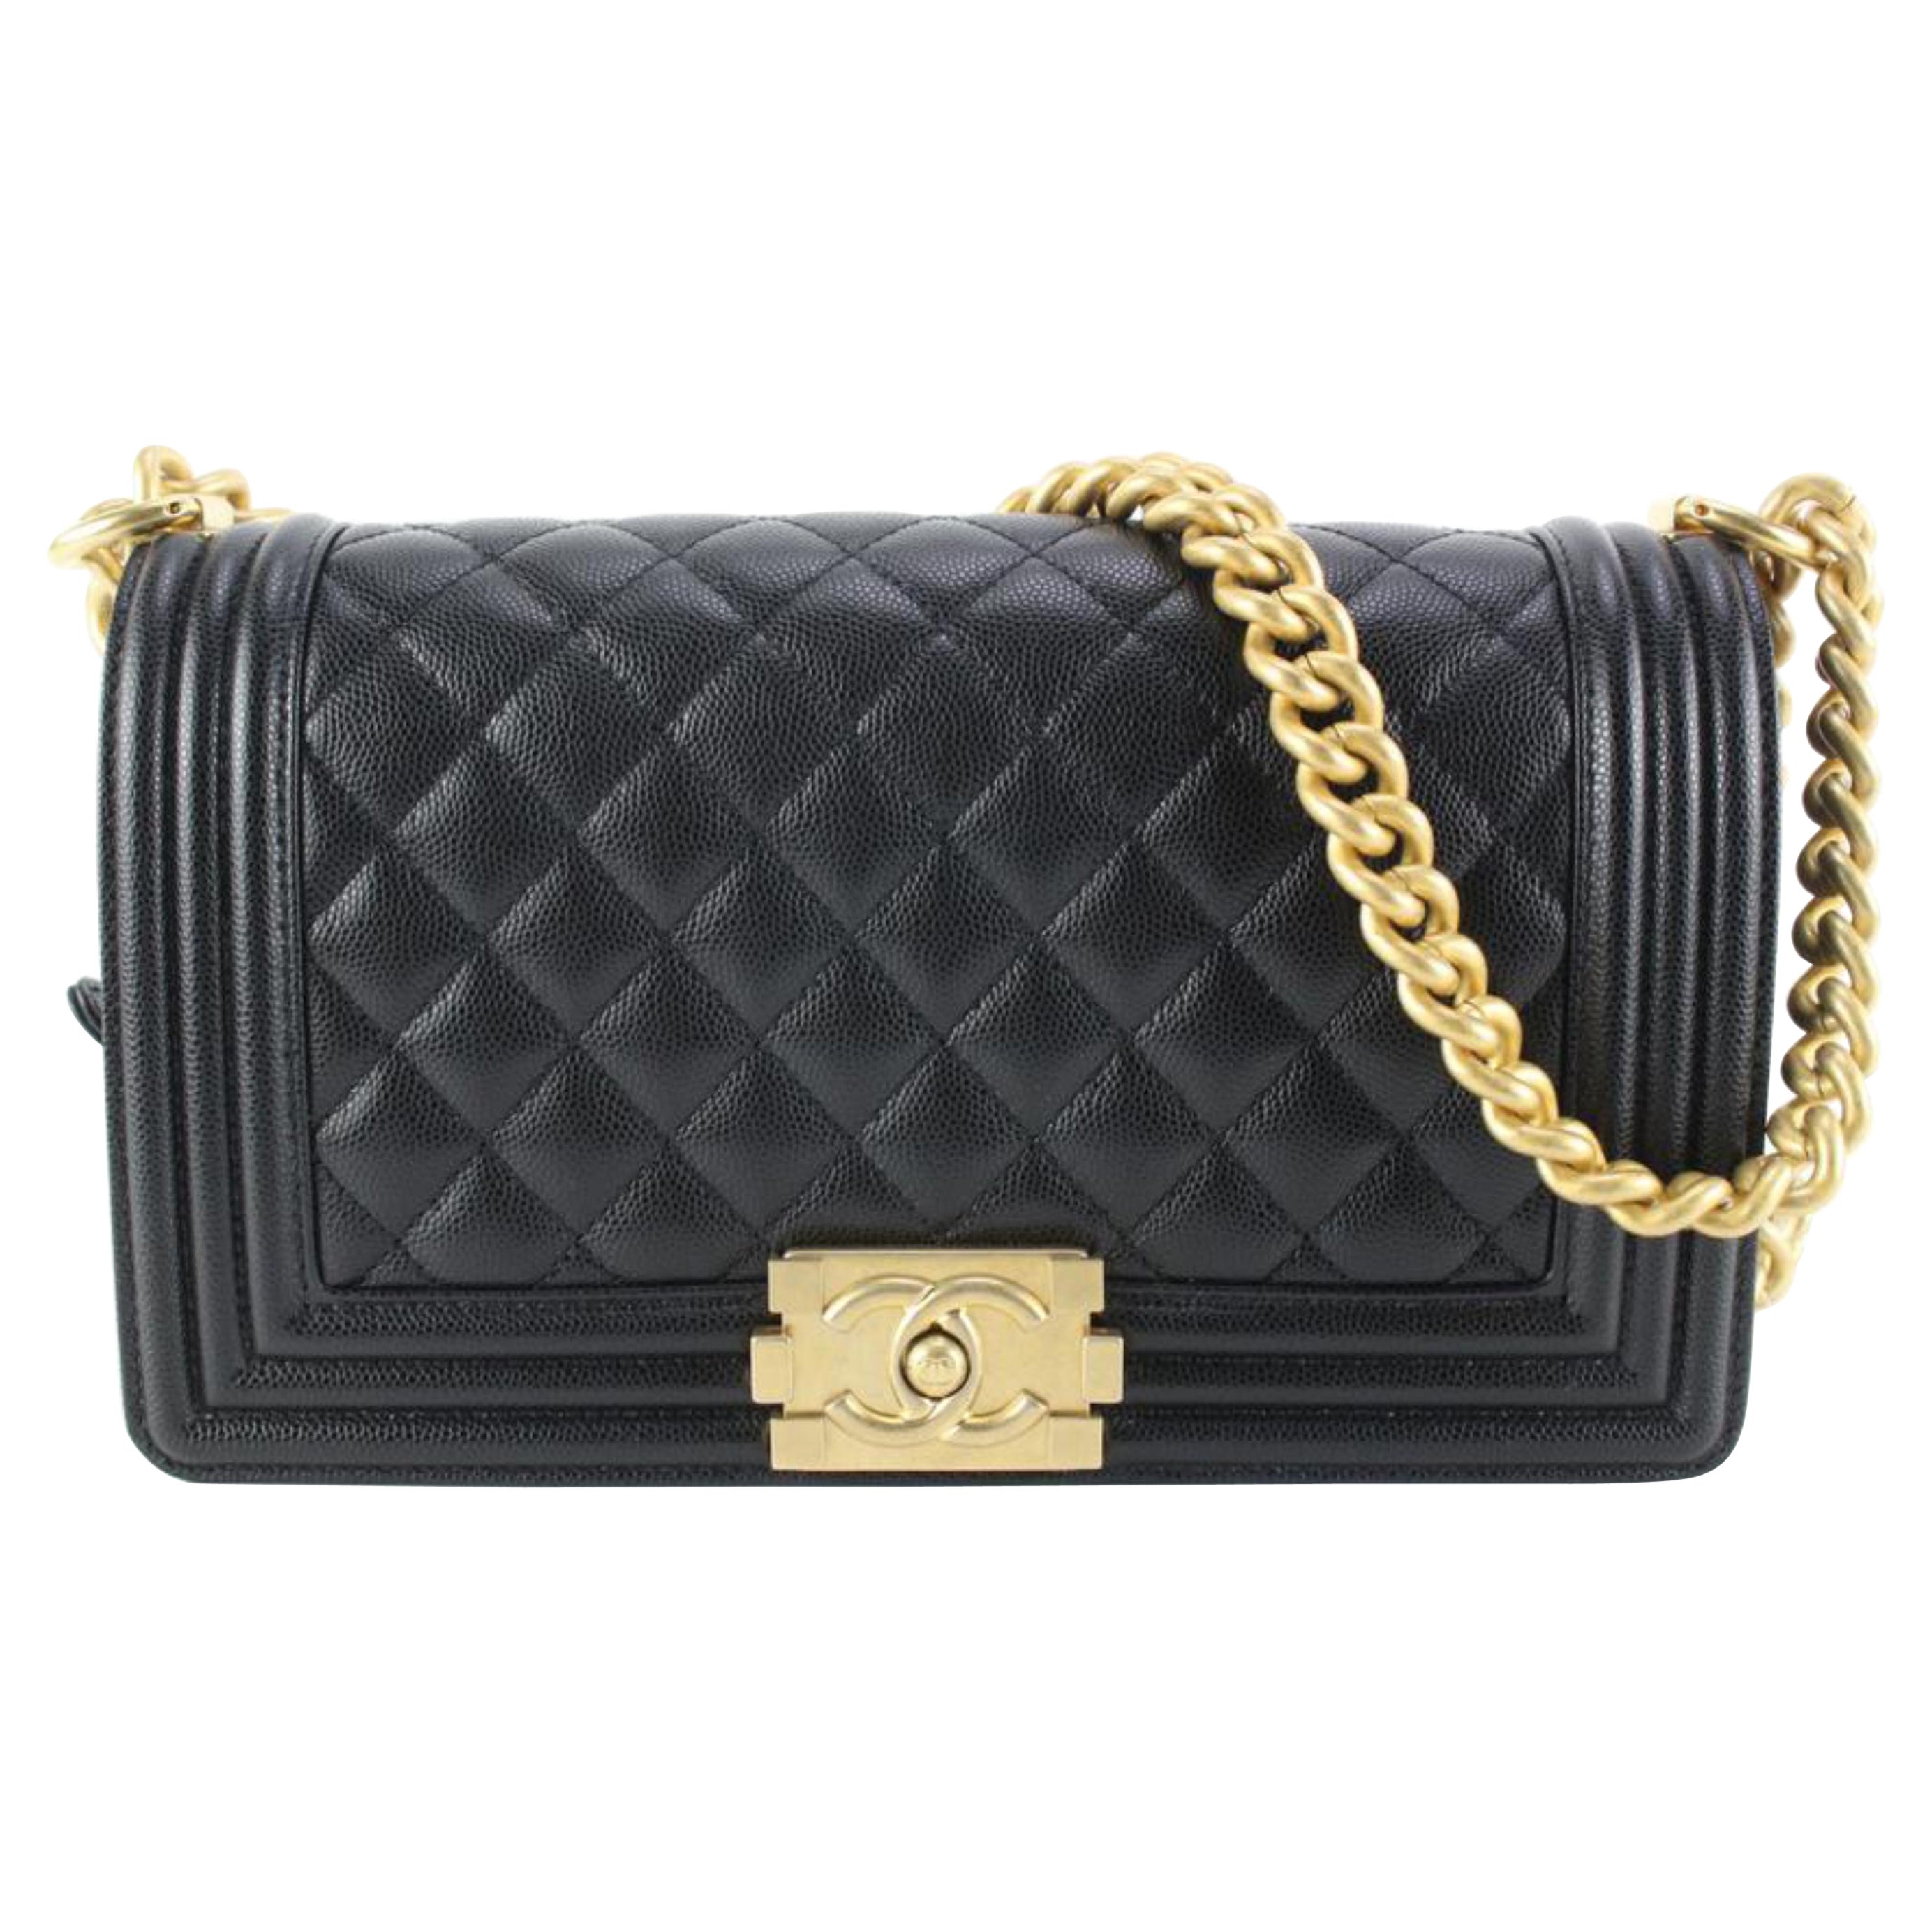 Chanel Black Quilted Caviar Leather Medium Boy Gold Chain Bag 84ck85s